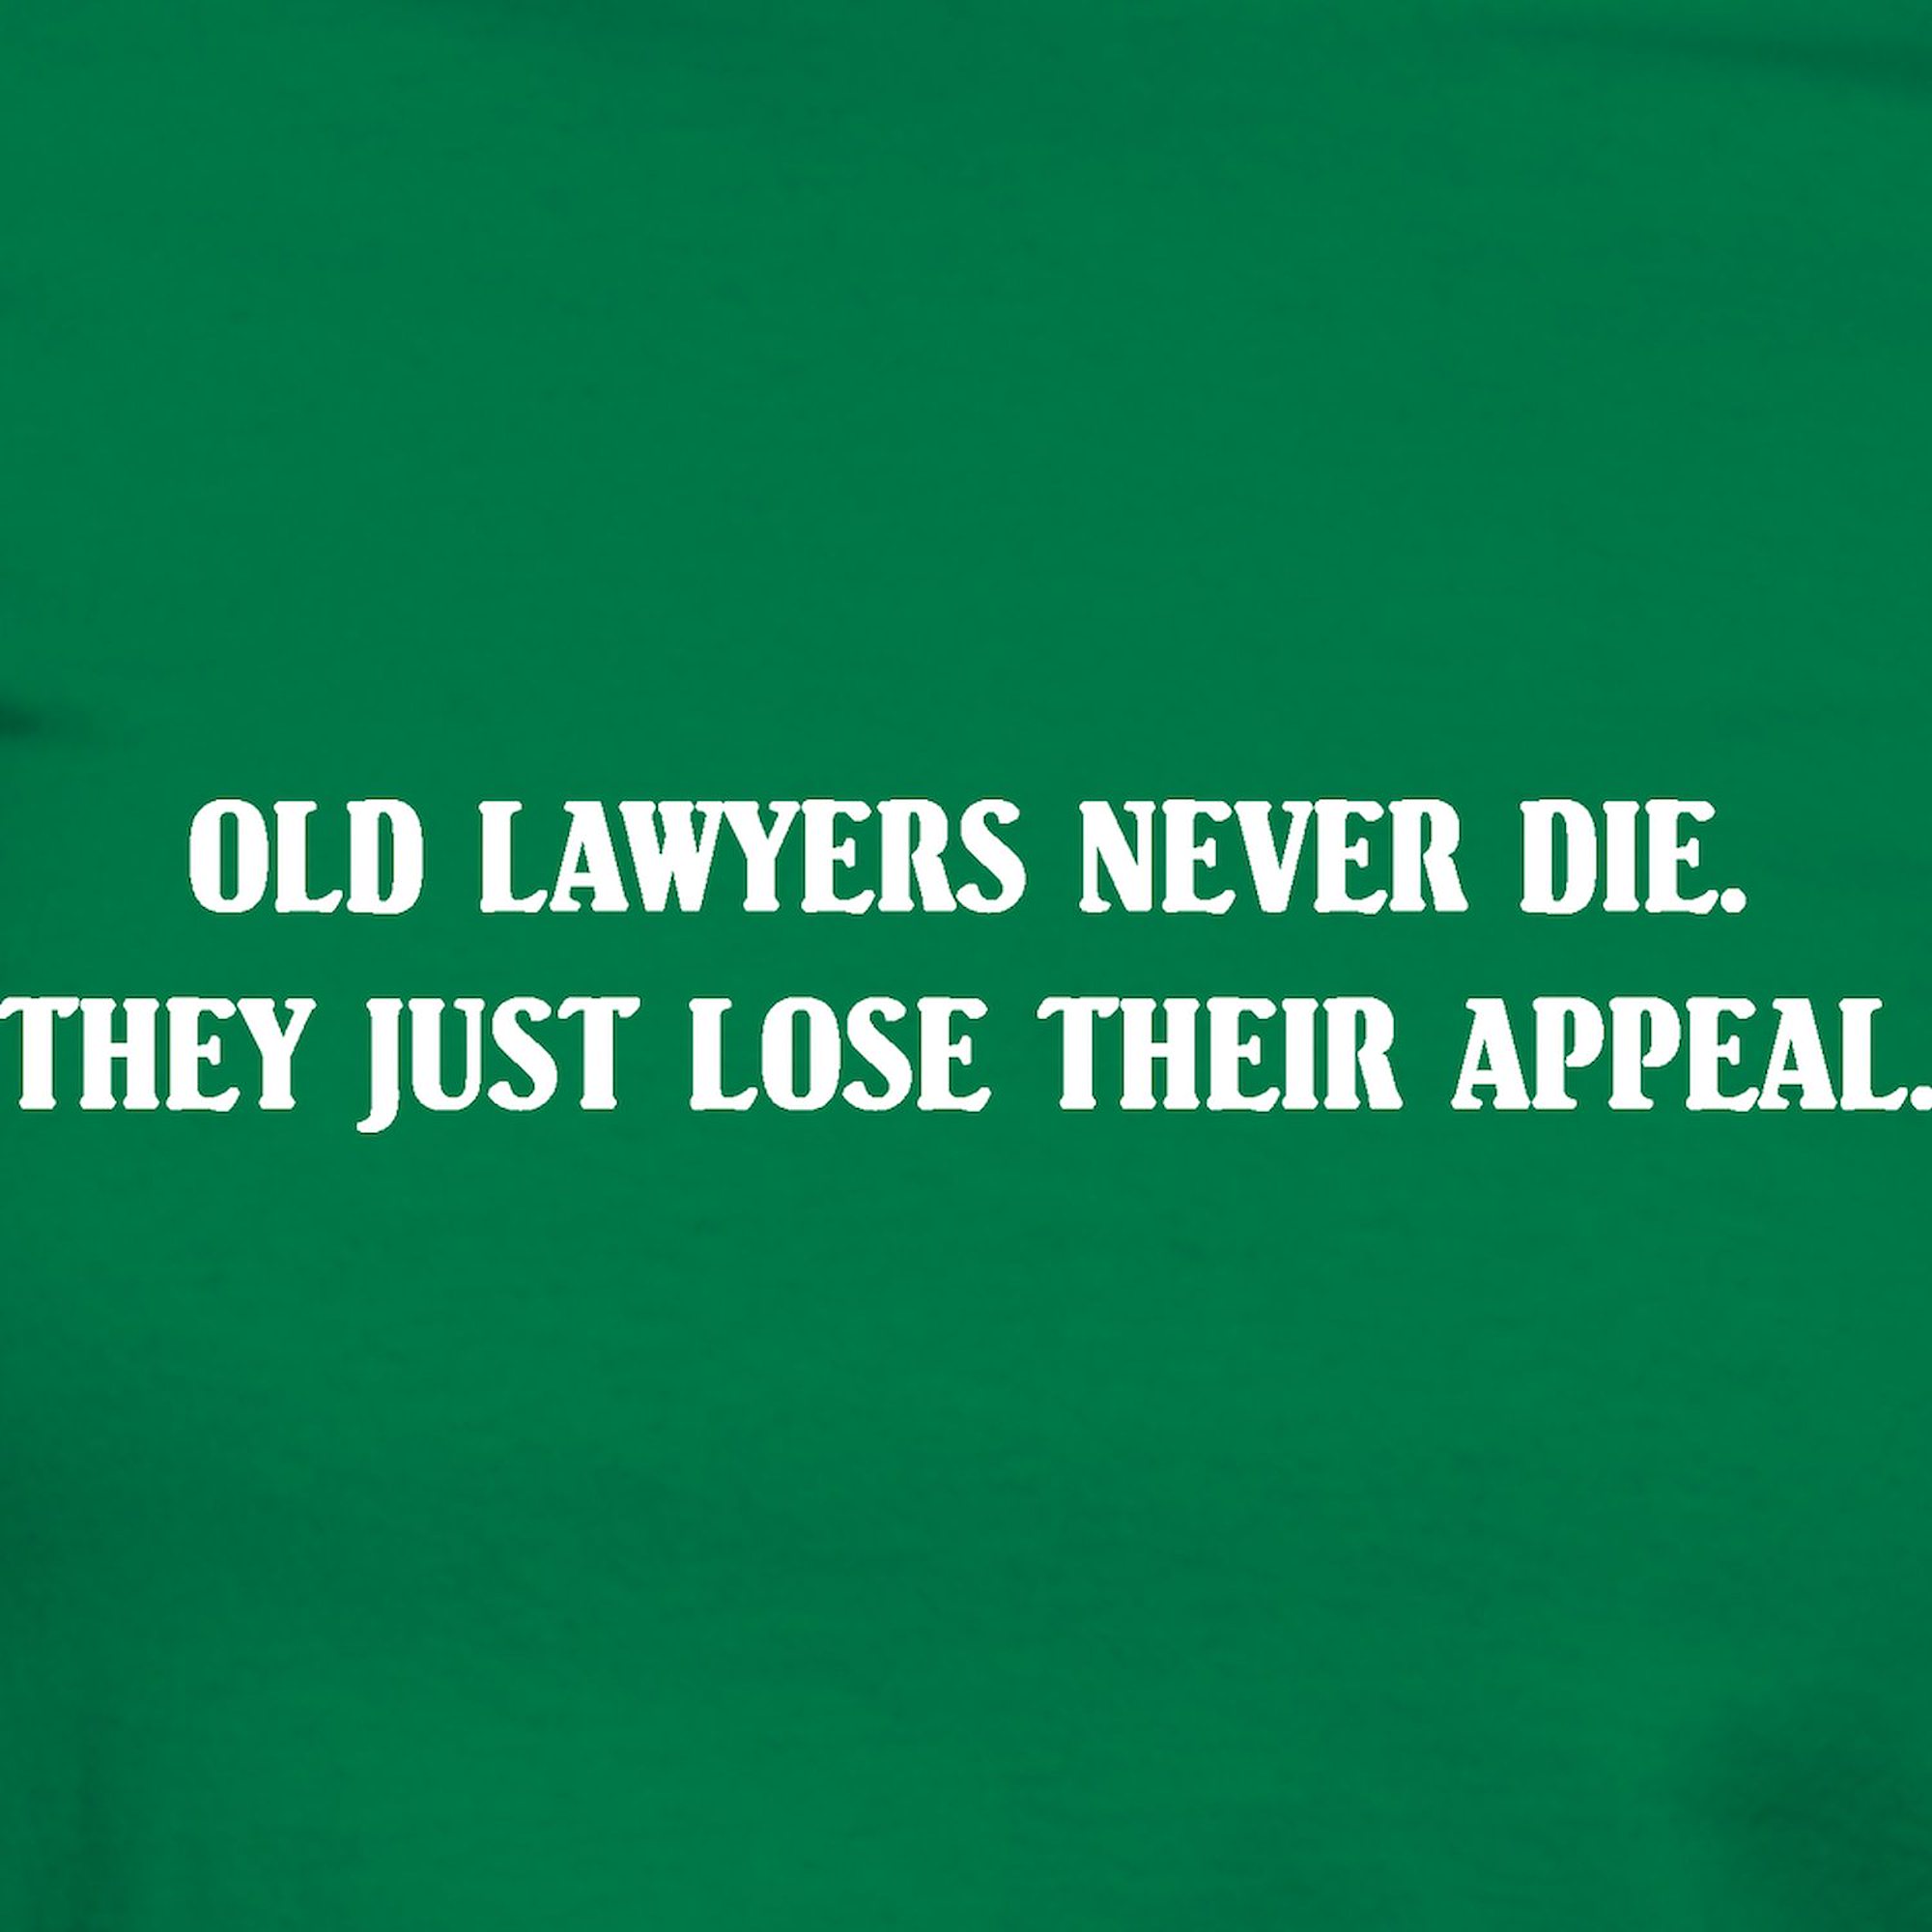 CafePress - Old Lawyers Never Die Black T Shirt - Women's Traditional Fit Dark T-Shirt - image 3 of 4